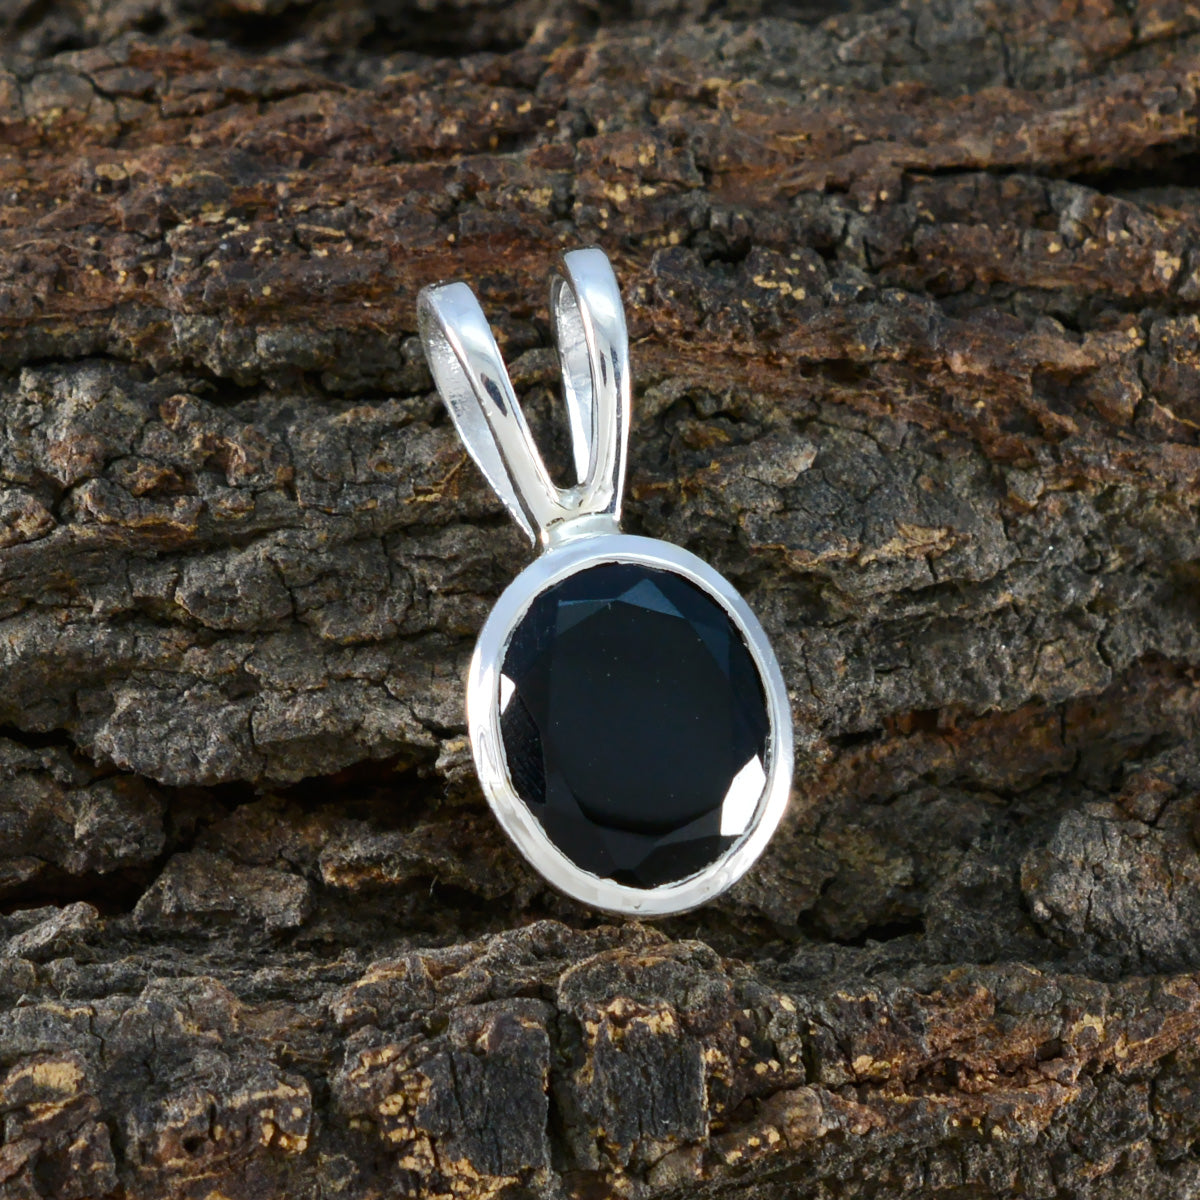 Riyo Graceful Gems Round Faceted Black Black Onyx Solid Silver Pendant Gift For Easter Sunday